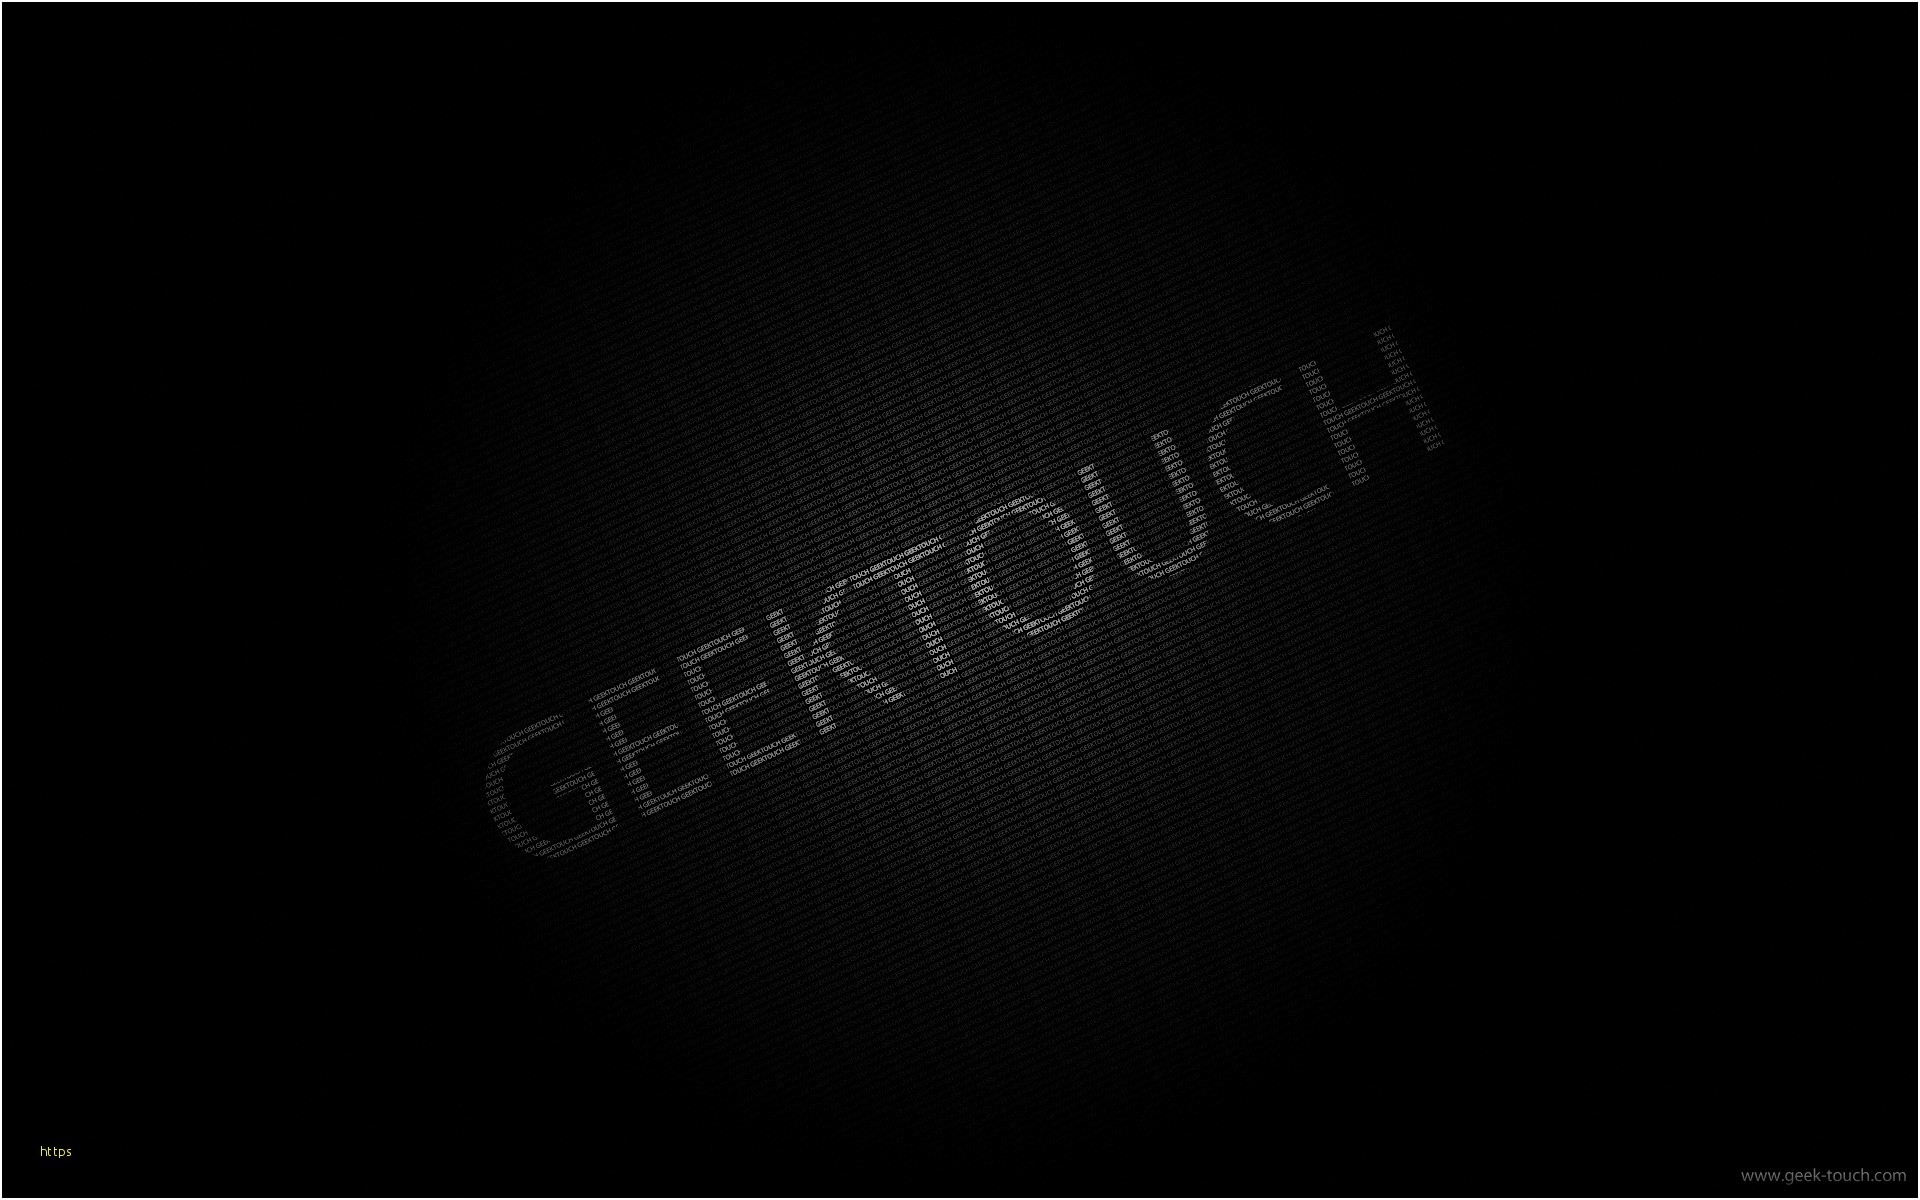 1920x1200 ... Geek Wallpaper Elegant Yet Another 20 Awesome Geek Wallpapers For All  Geeks ...